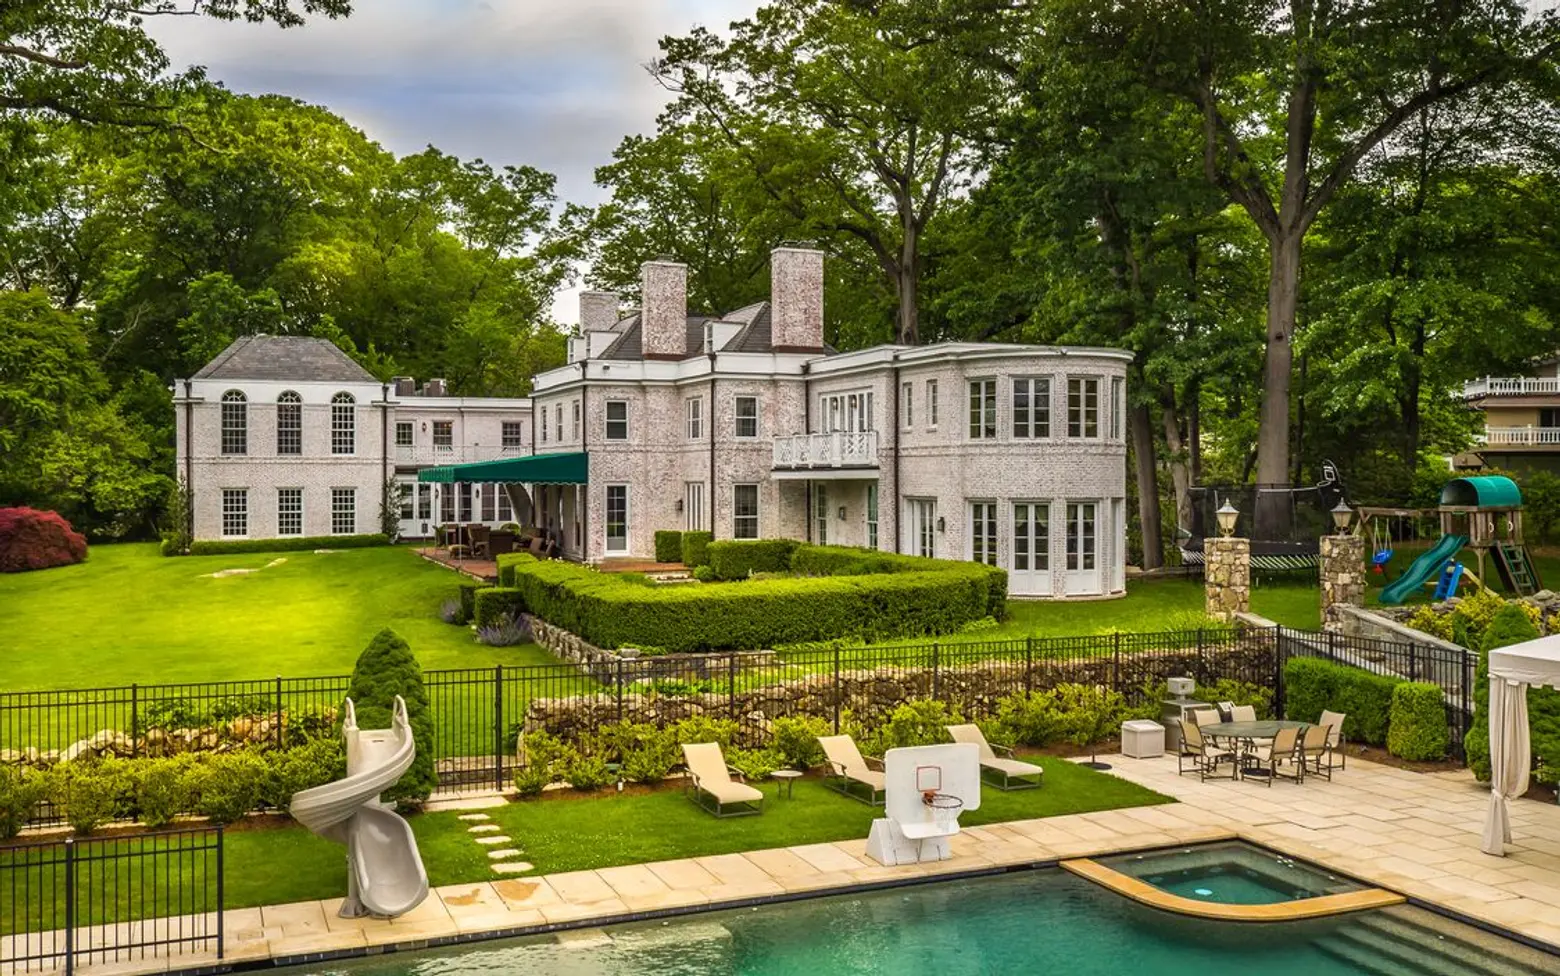 $3.85M waterfront estate designed by McKim, Mead & White is just 30 minutes outside NYC